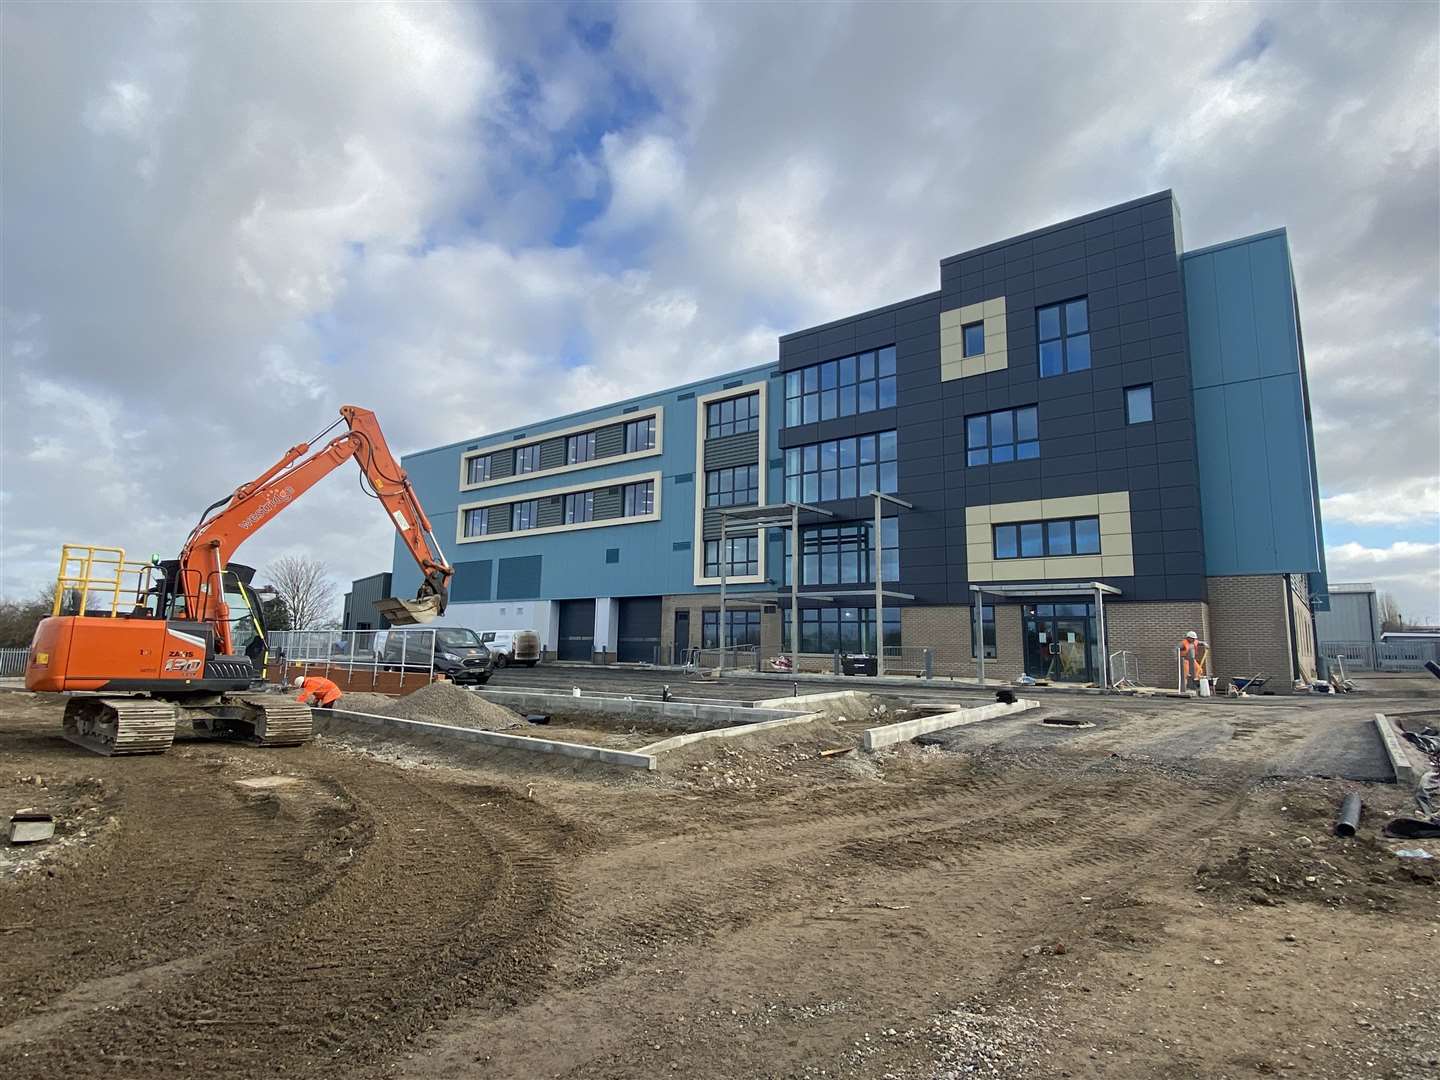 The new ambulance centre being built in Bredgar Lane, Gillingham. Picture: South East Ambulance Service